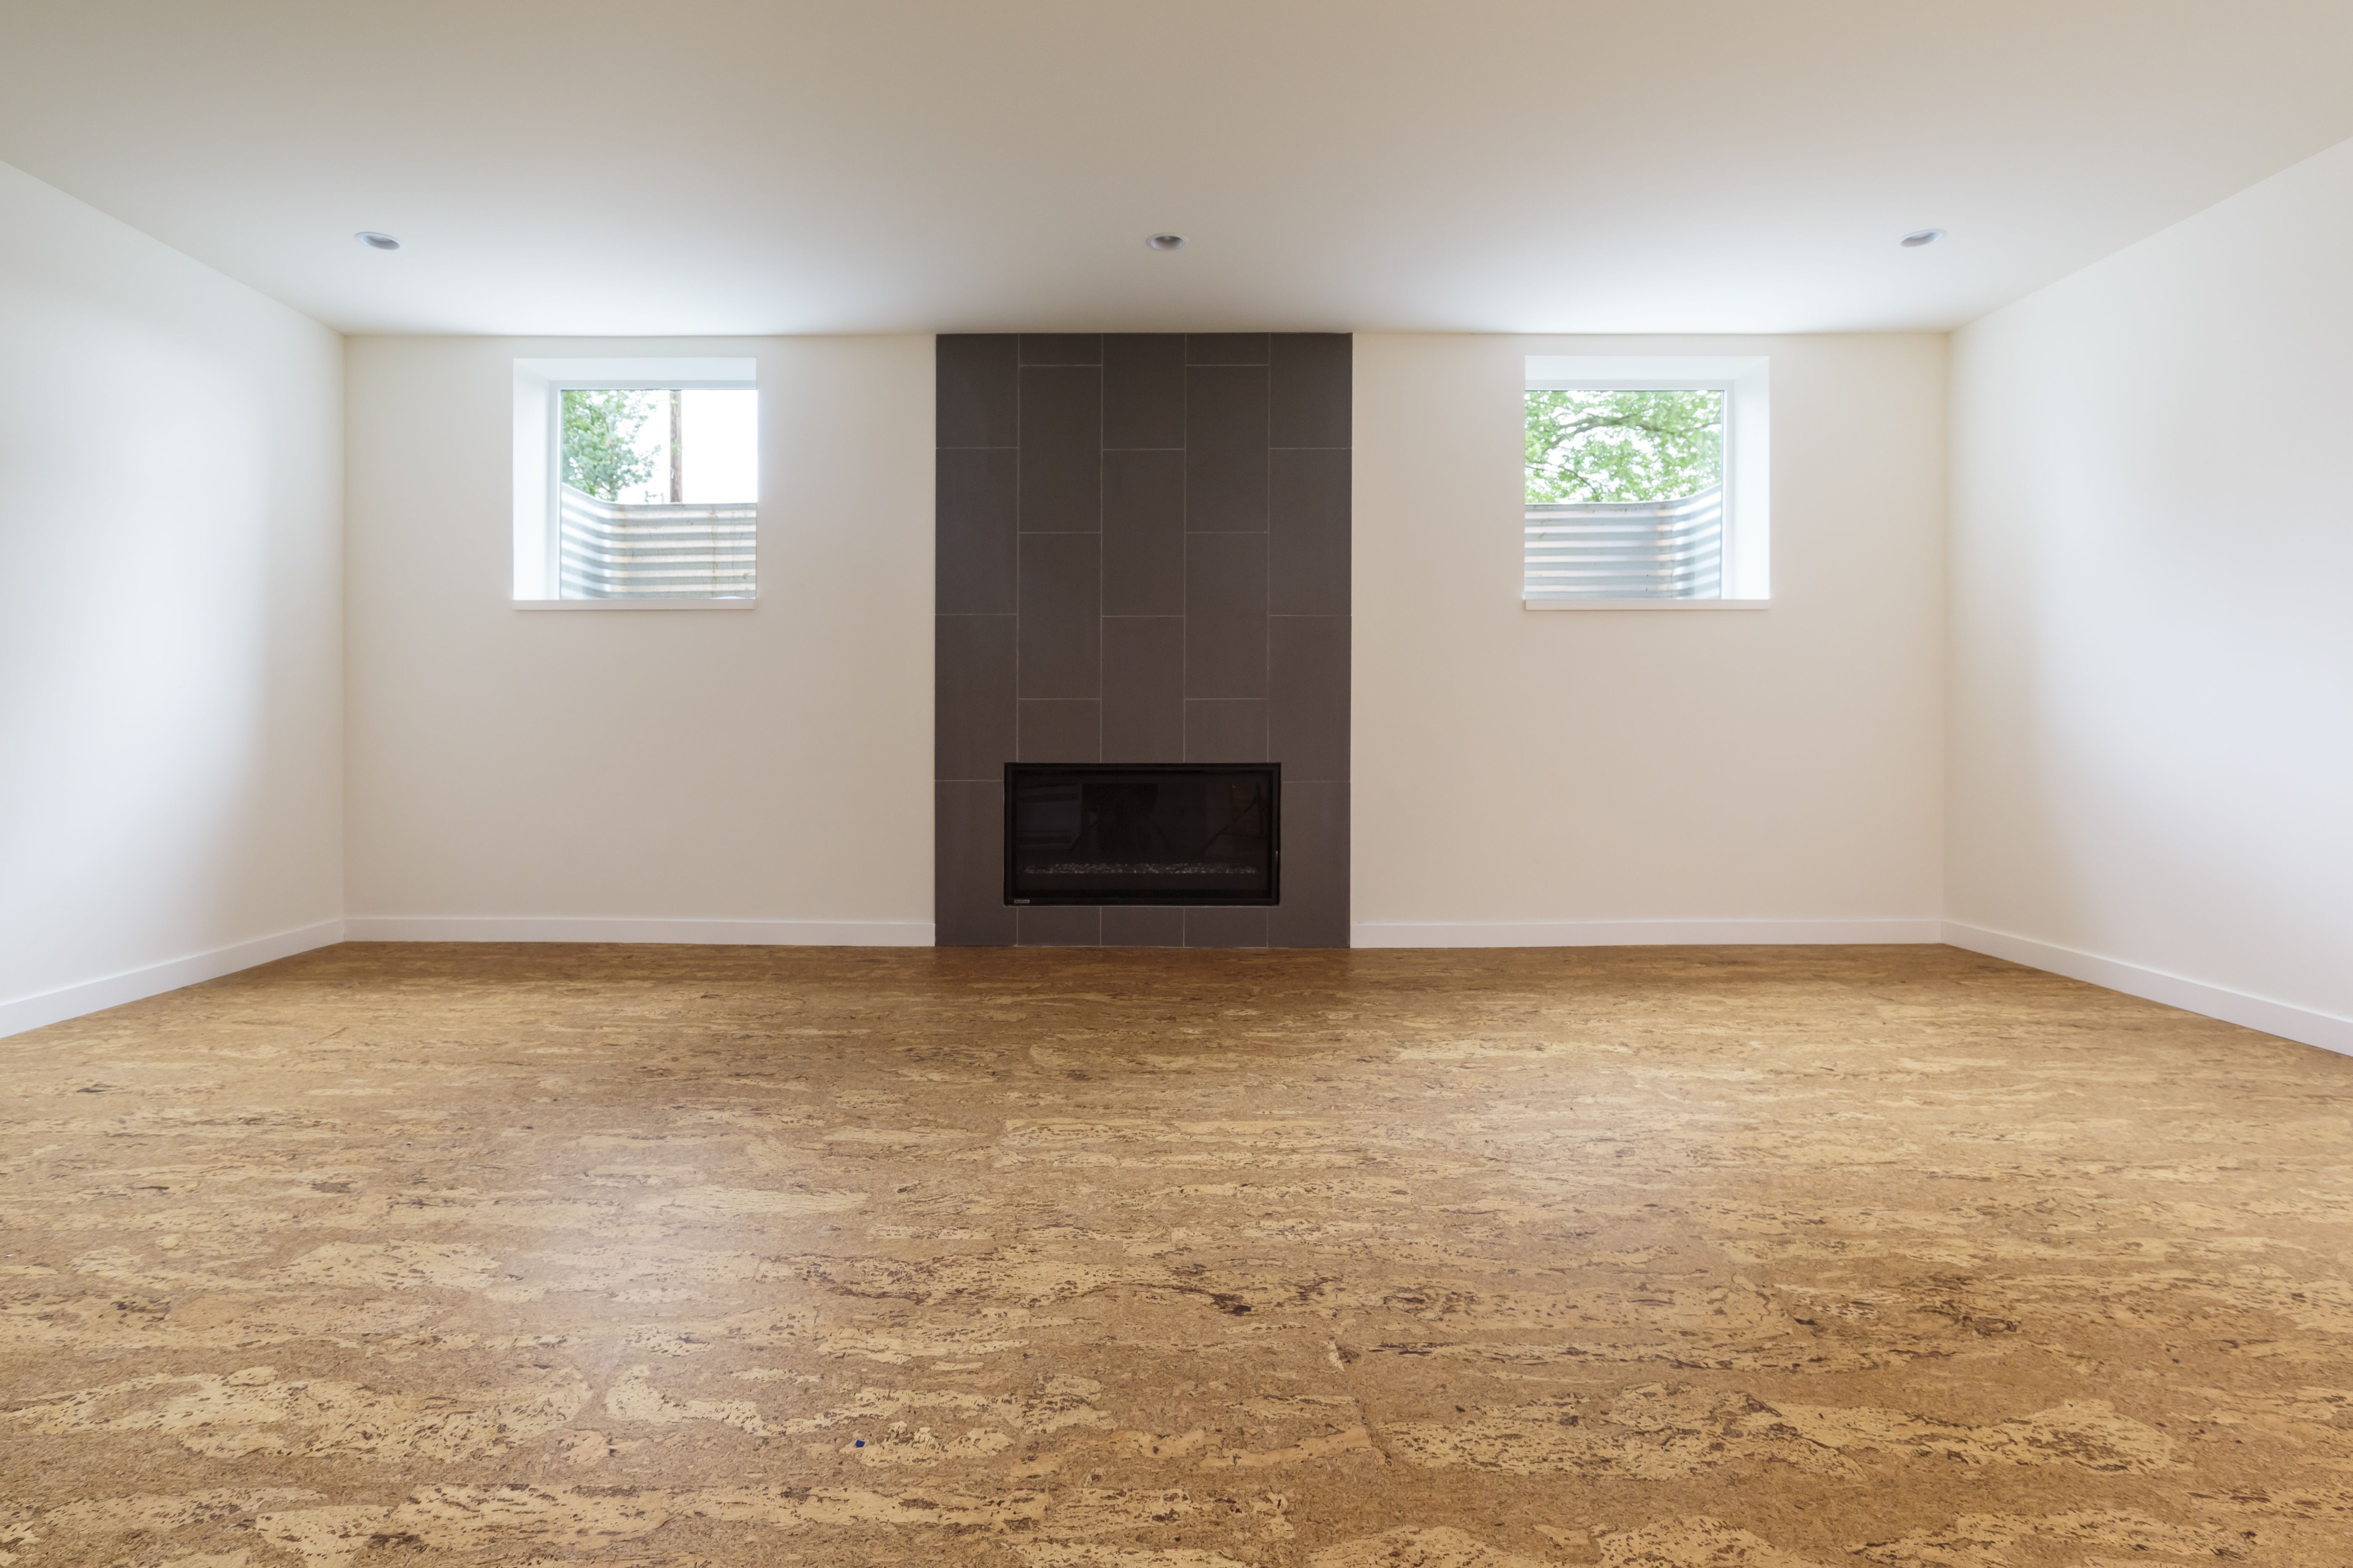 20 Stylish Hardwood Floor Price Per Square Foot 2024 free download hardwood floor price per square foot of cork flooring pros cons and cost throughout cork flooring in unfurnished new home 647206431 57e7c0c95f9b586c3504ca07